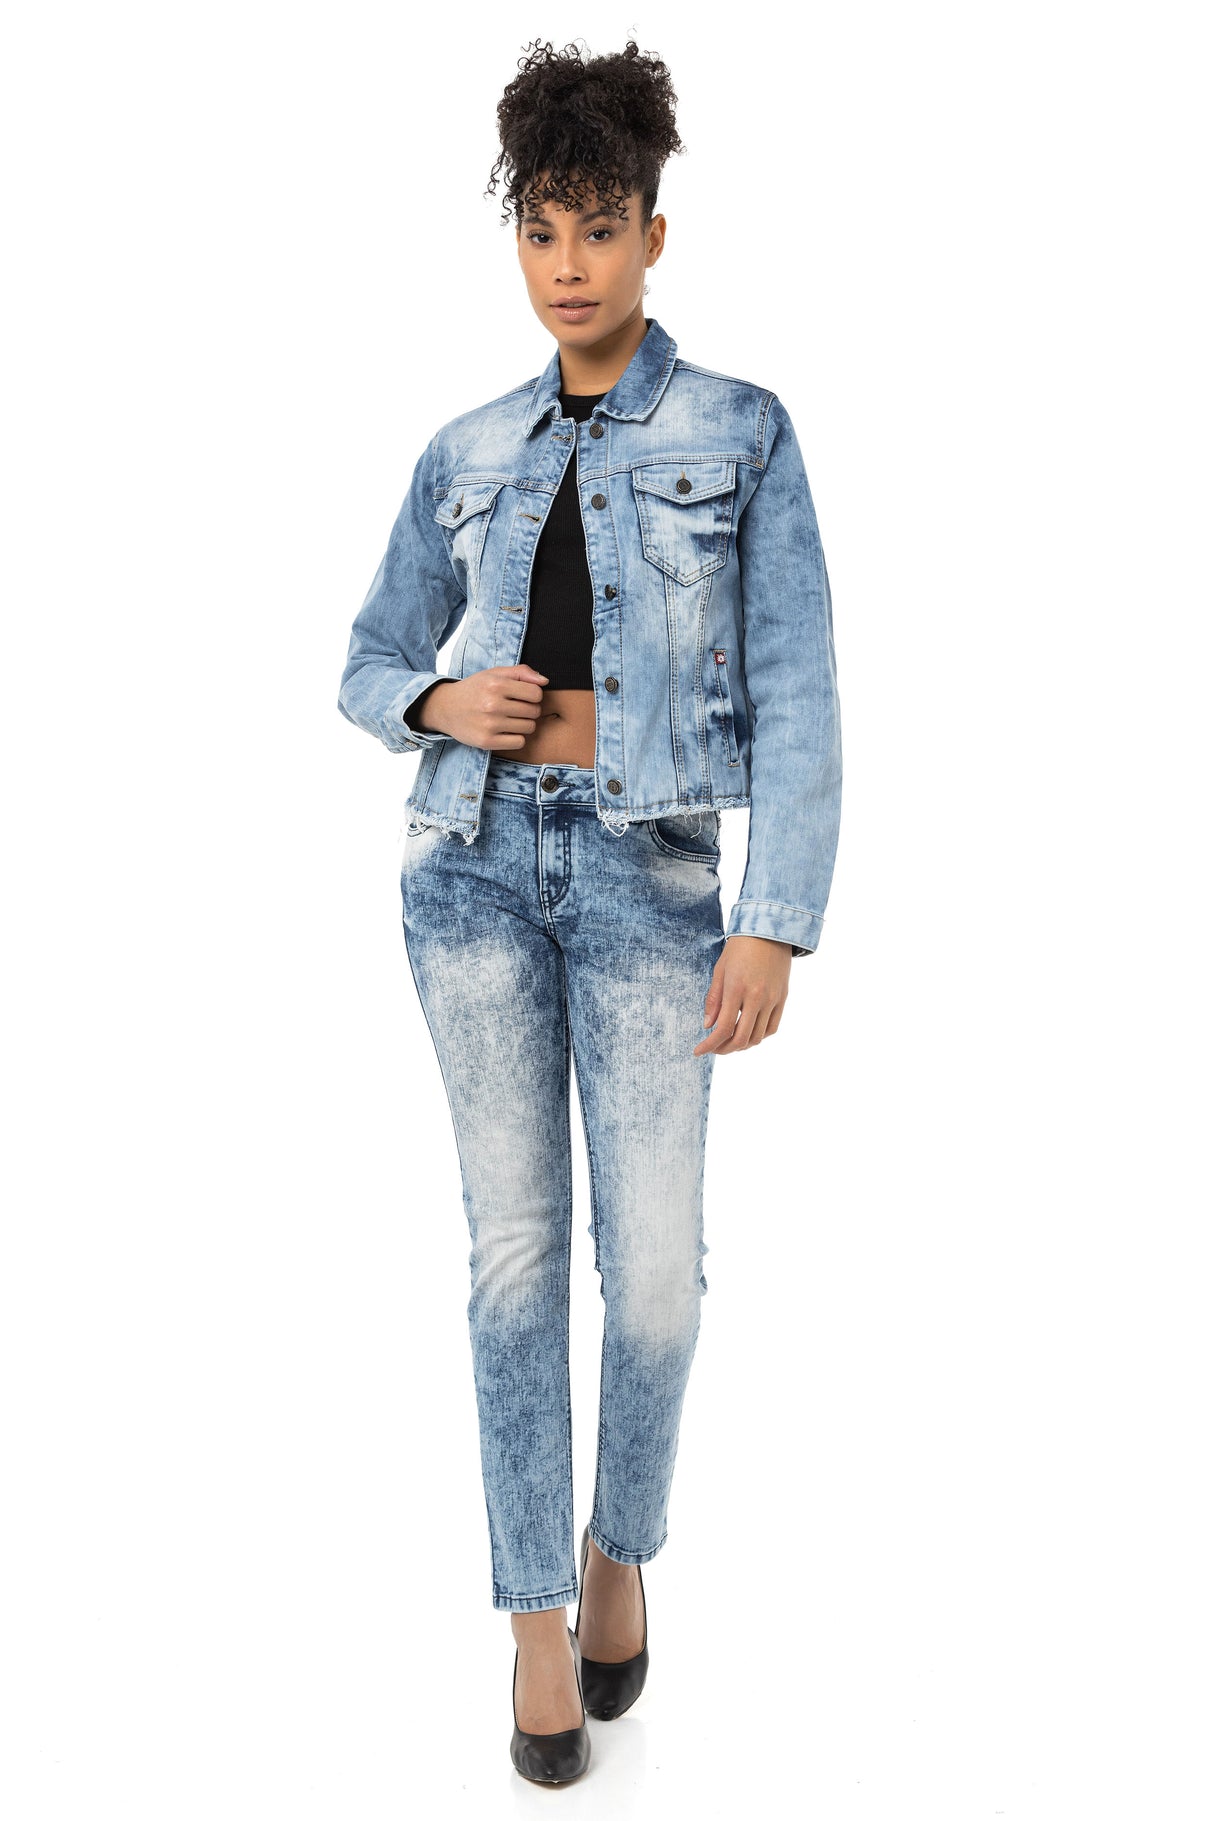 WD459 Donne jeans slim-fit in un look moderno